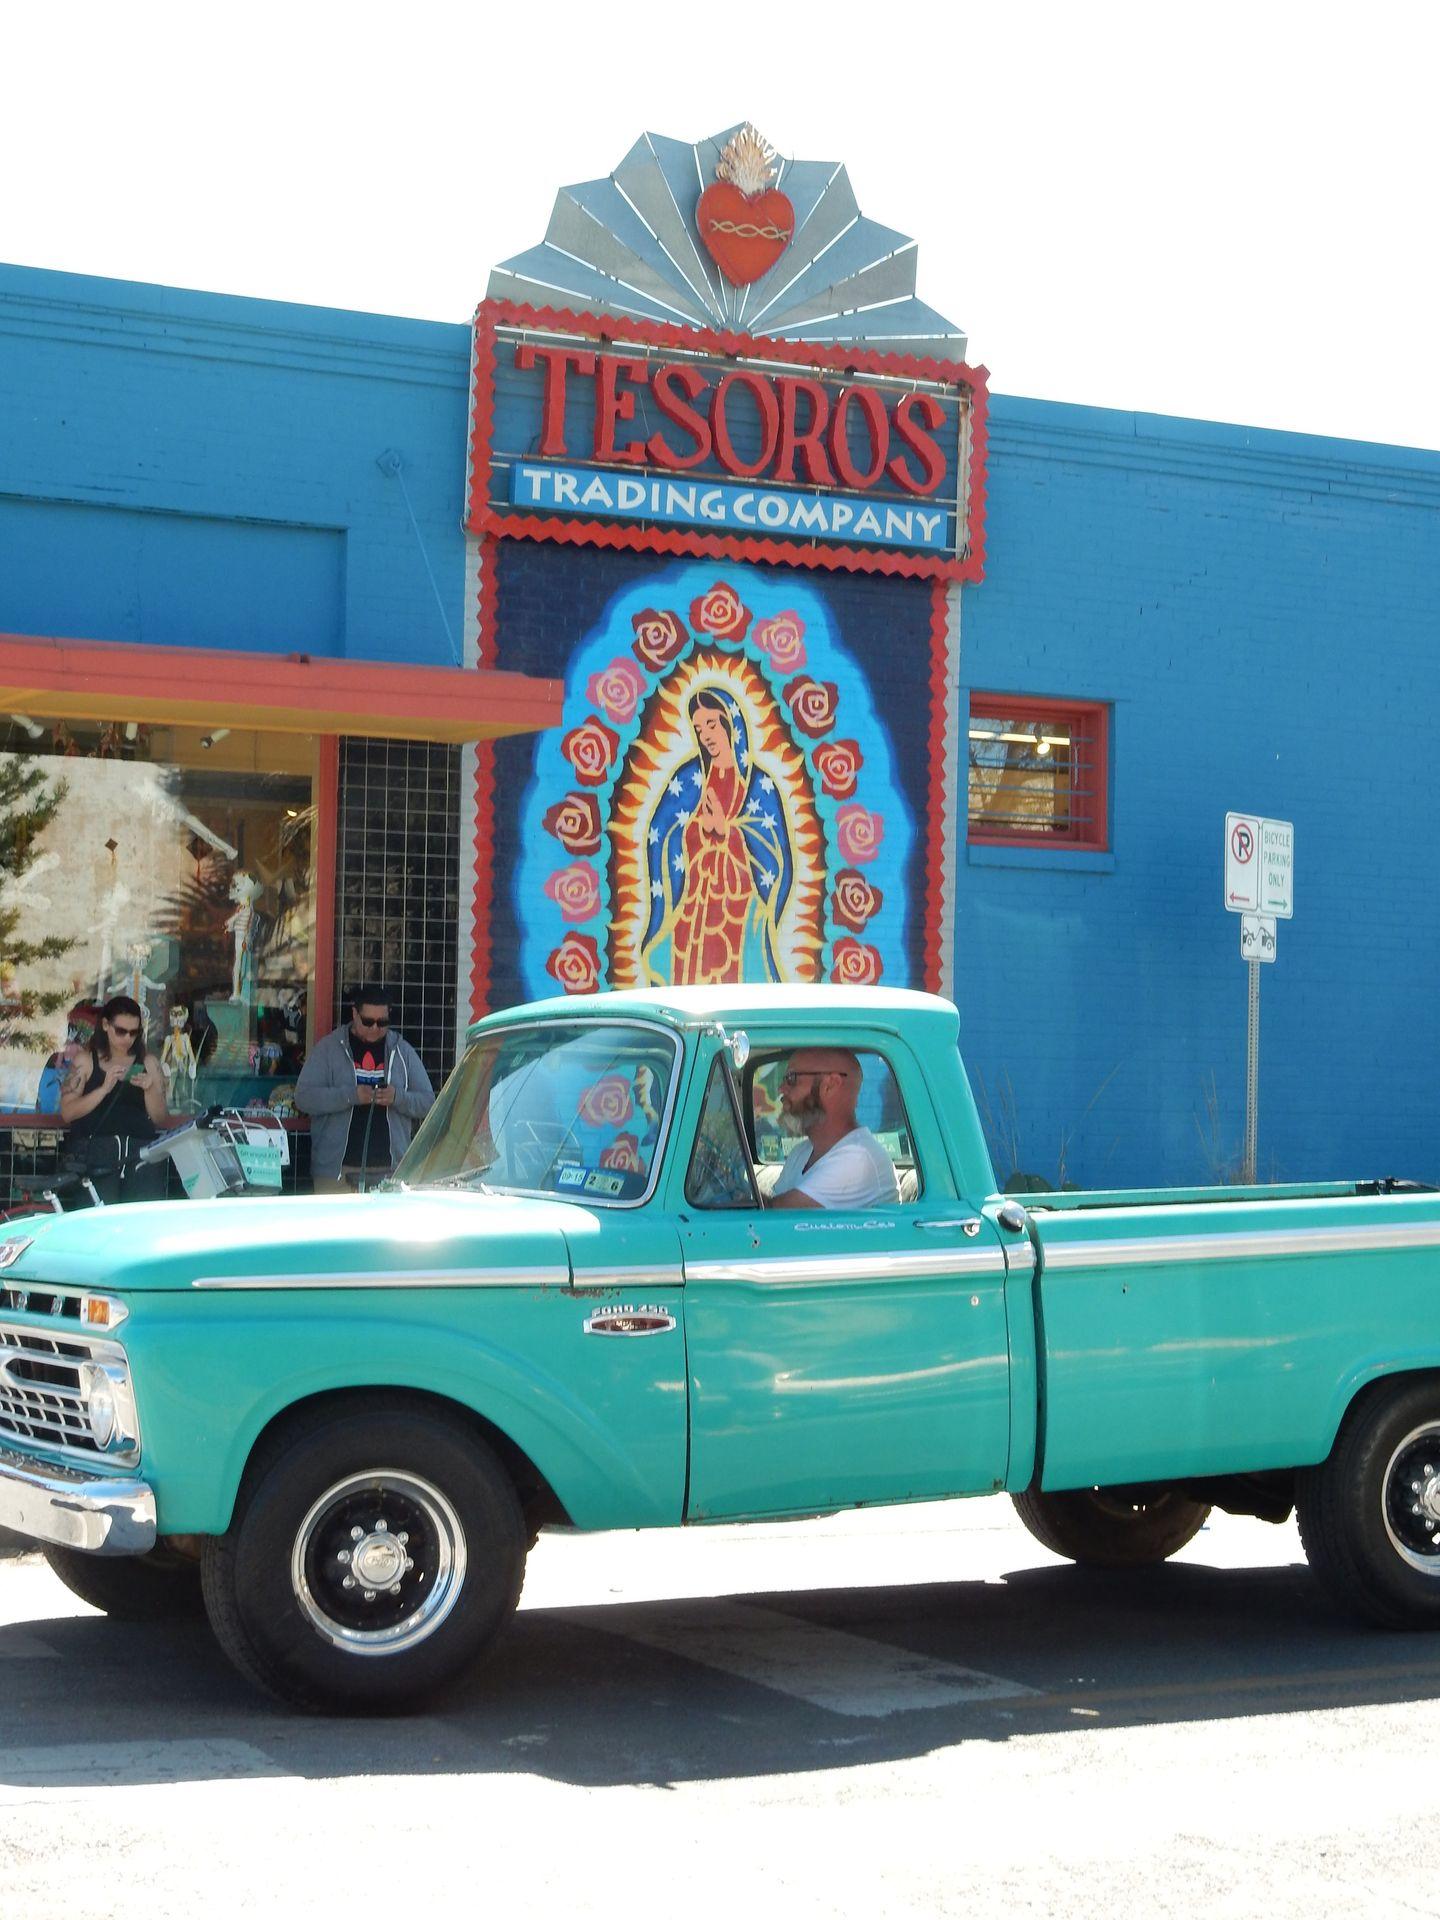 A blue pick up truck in front of Tesoros Trading Company.